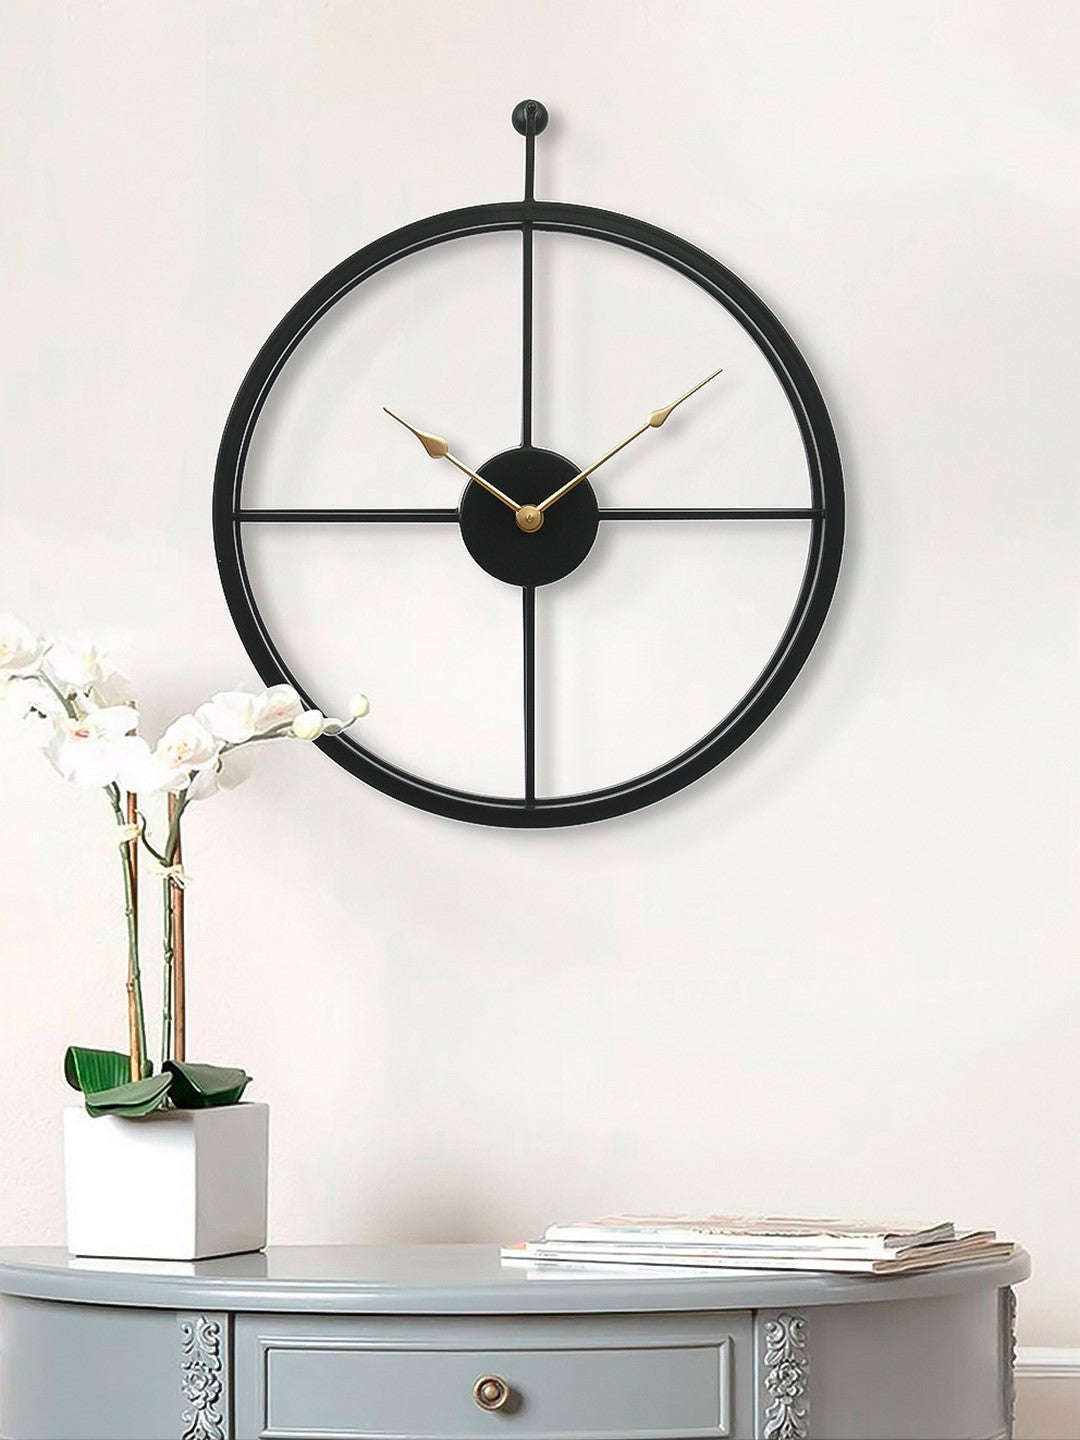 Black Iron Round Handcrafted Modern Wall Clock Without Glass and numbers 2